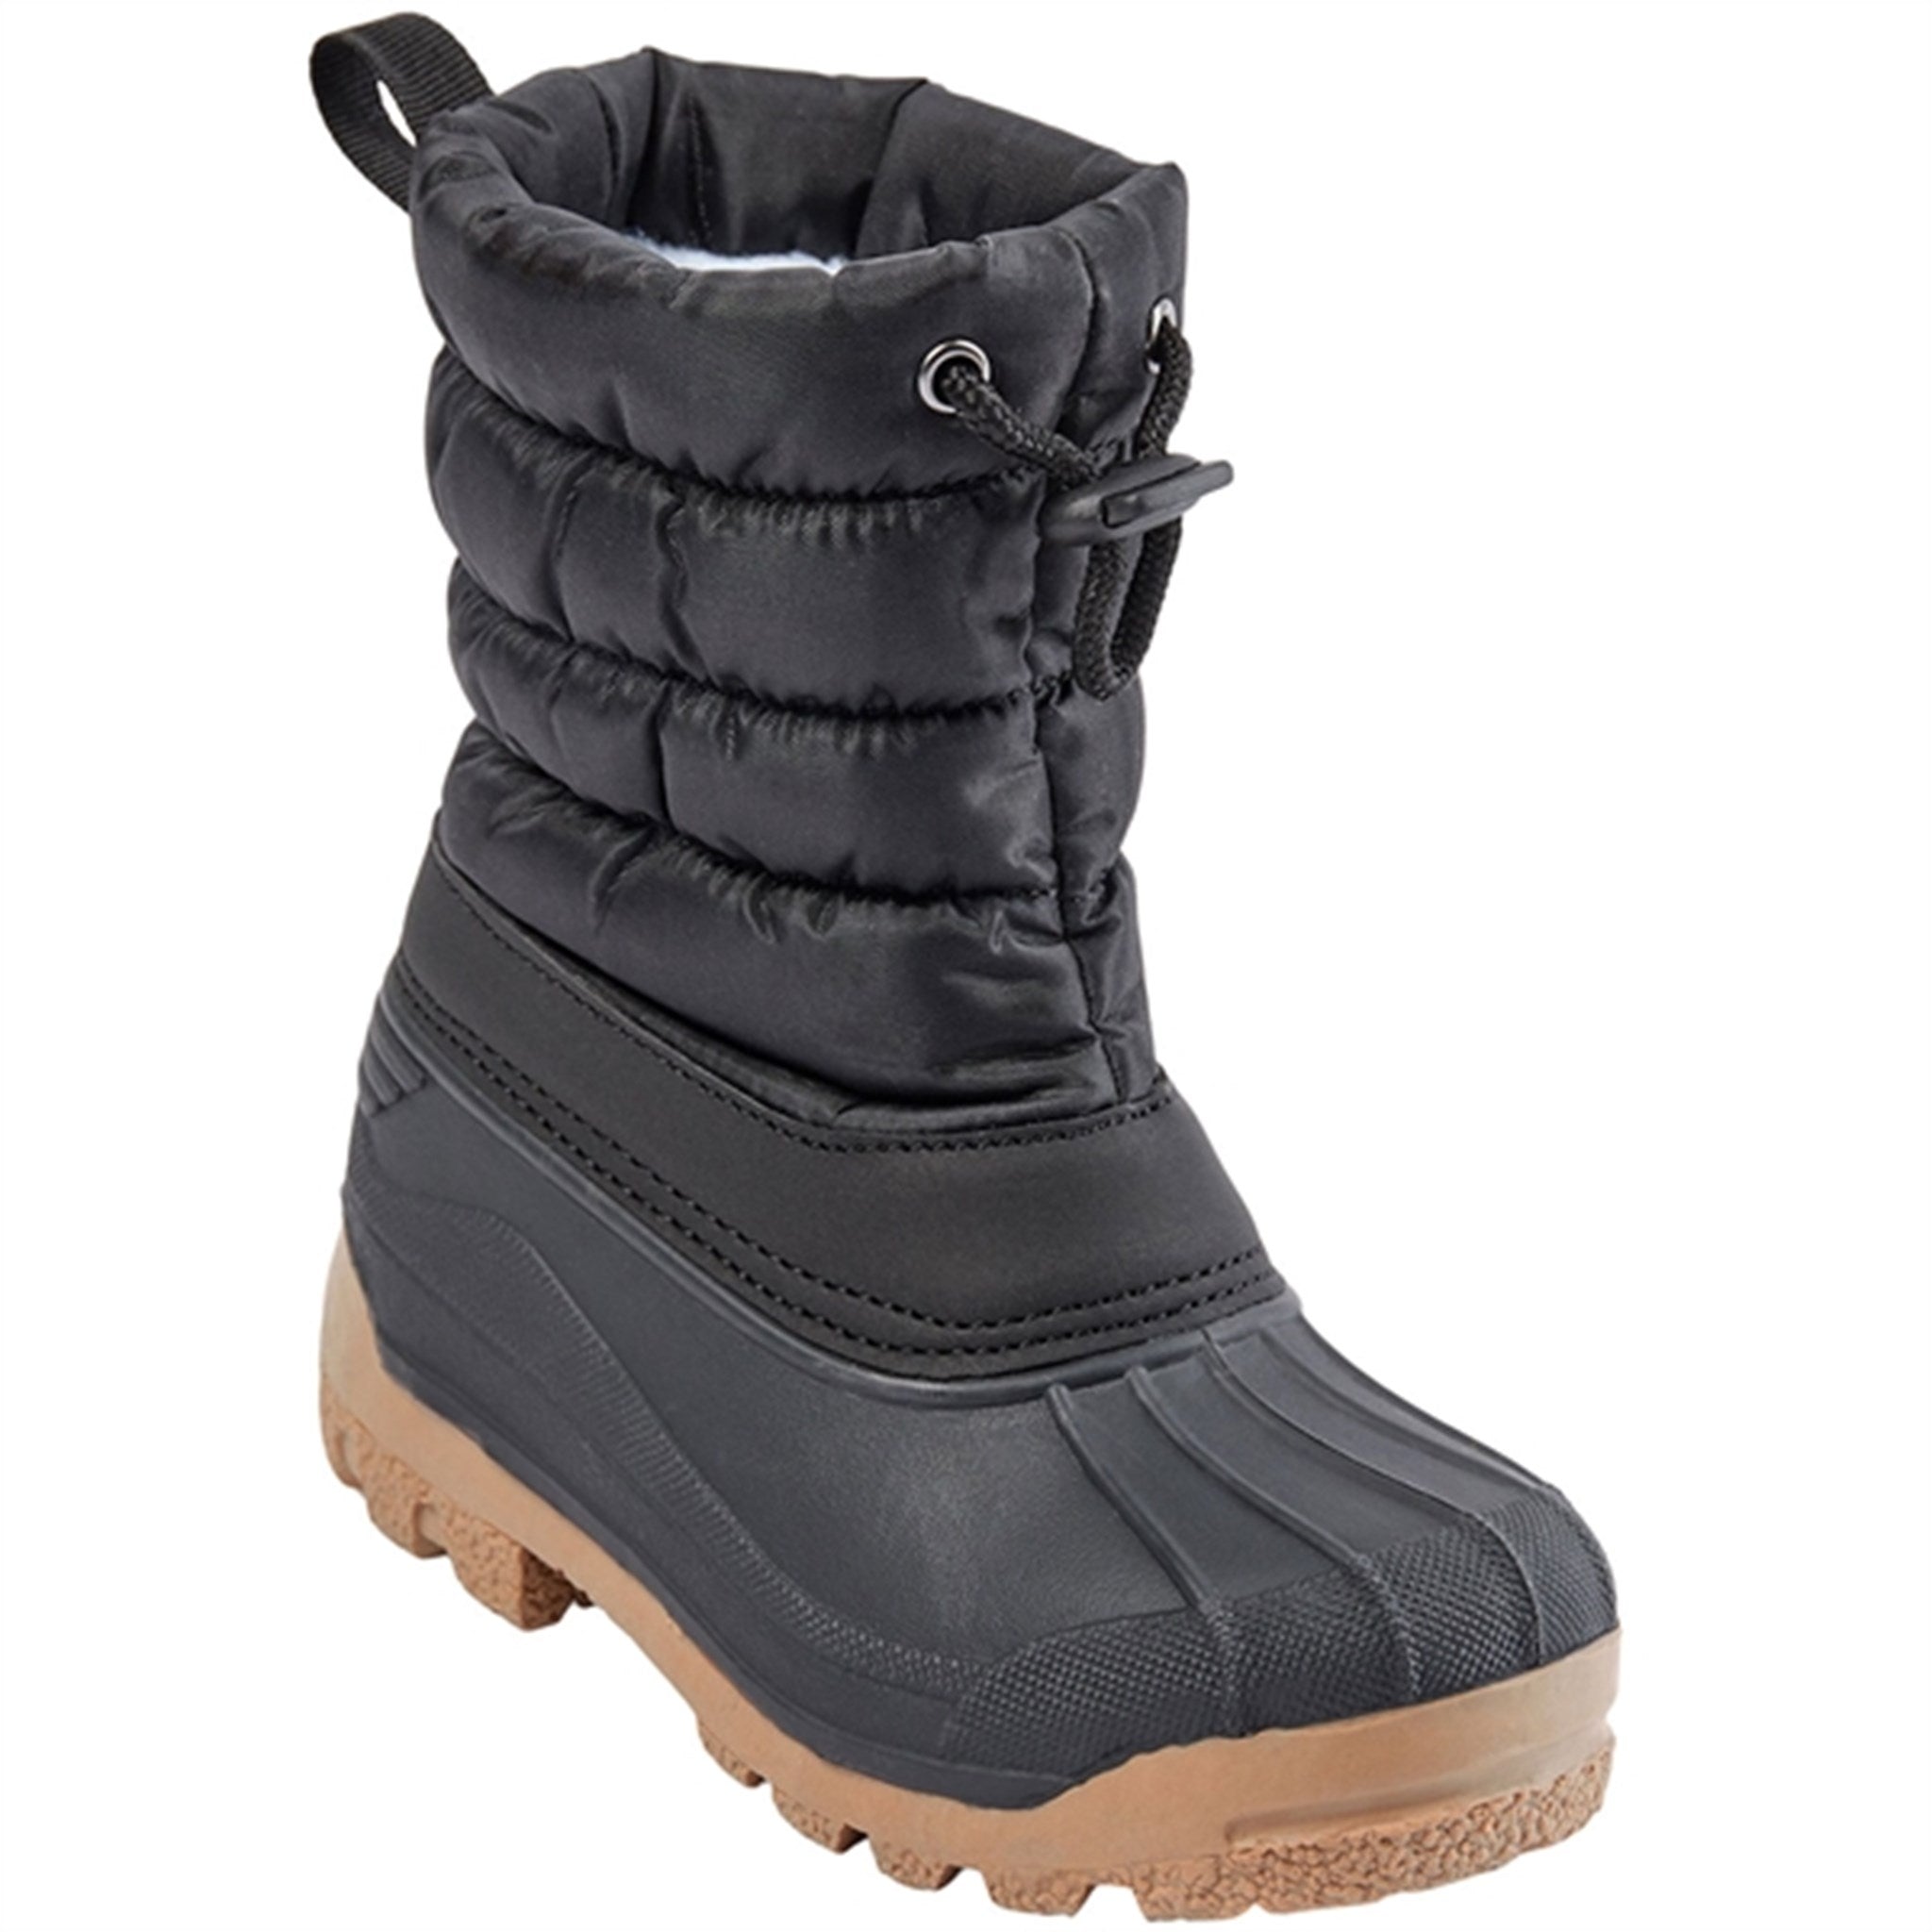 Sofie Schnoor Thermo Boots Black 8